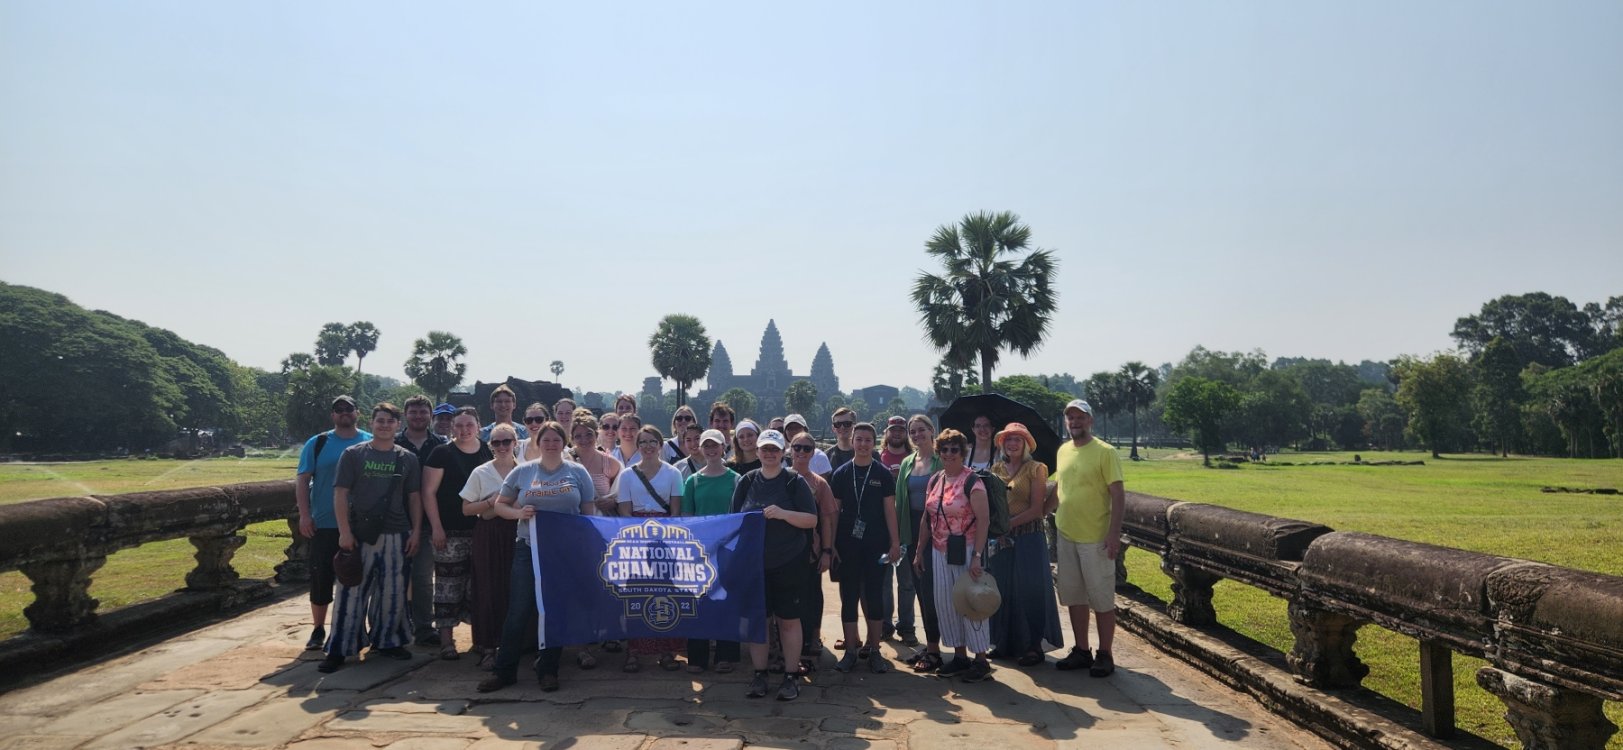 Honors students at the entrance of the Angkor Wat Temples in Cambodia